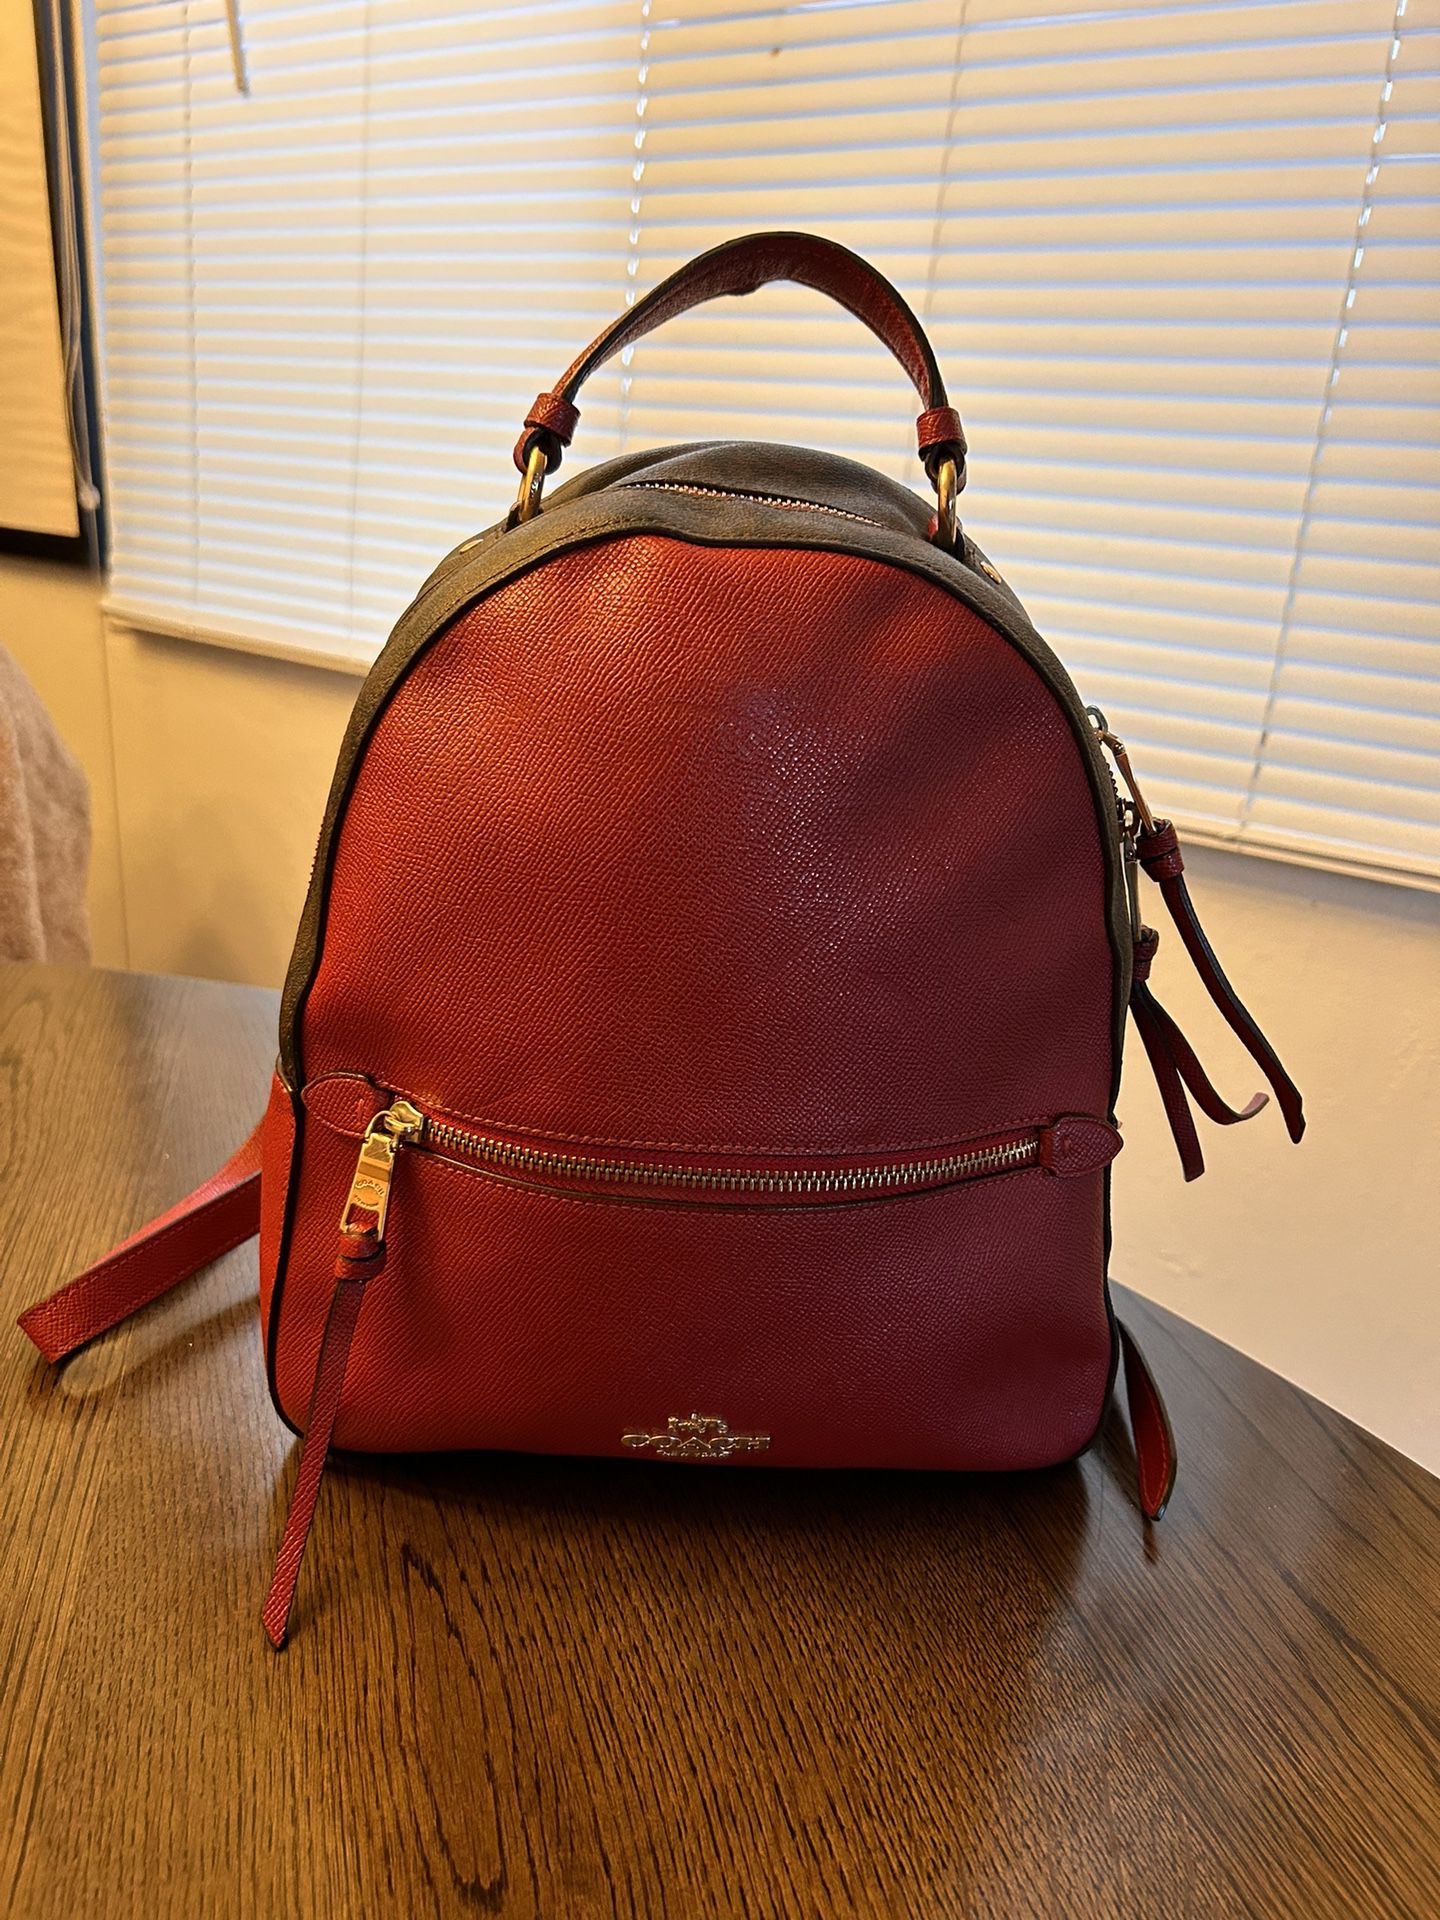 COACH JORDYN BACKPACK - RED AND BROWN